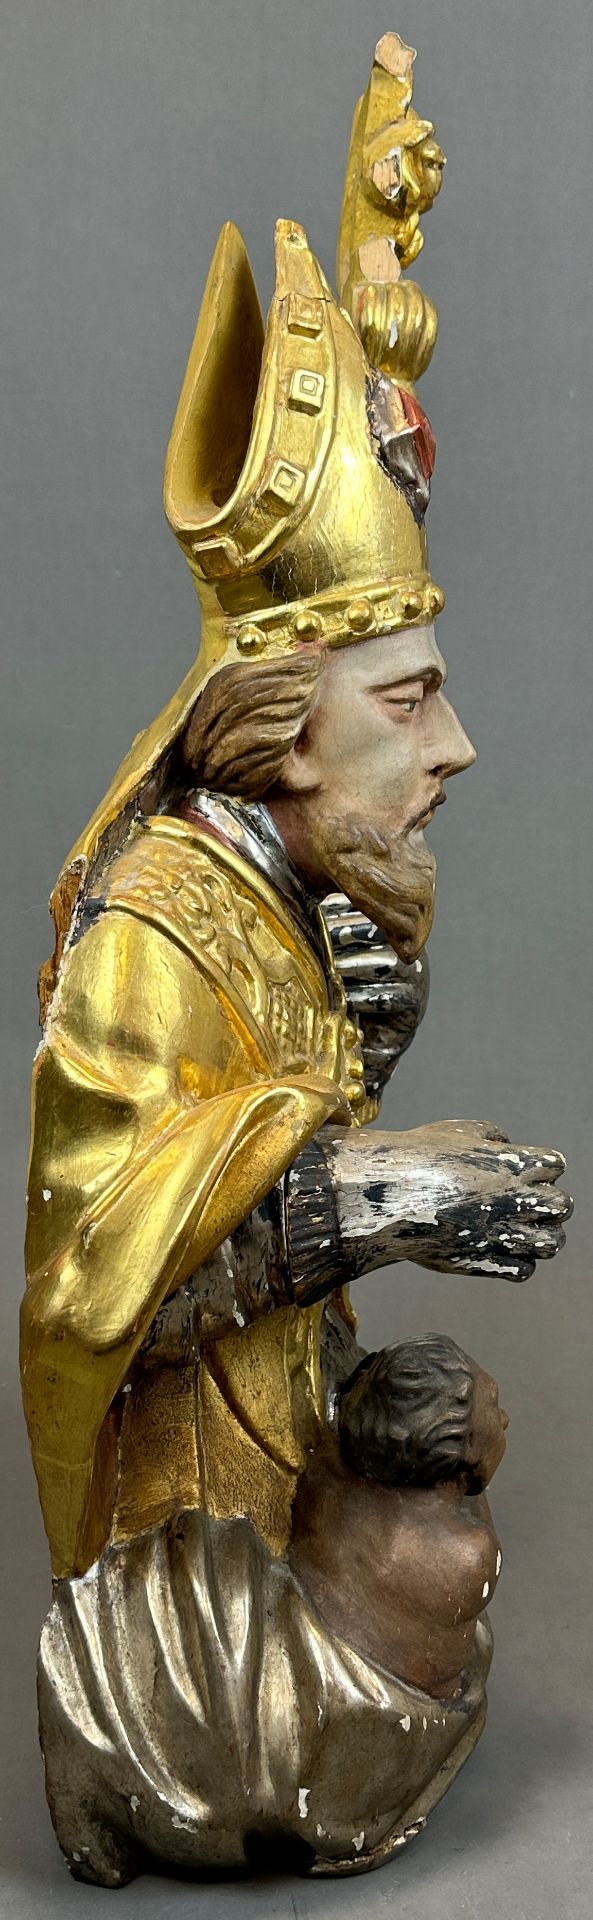 Wooden bust. Bishop. Late 18th century. Austria. - Image 4 of 10